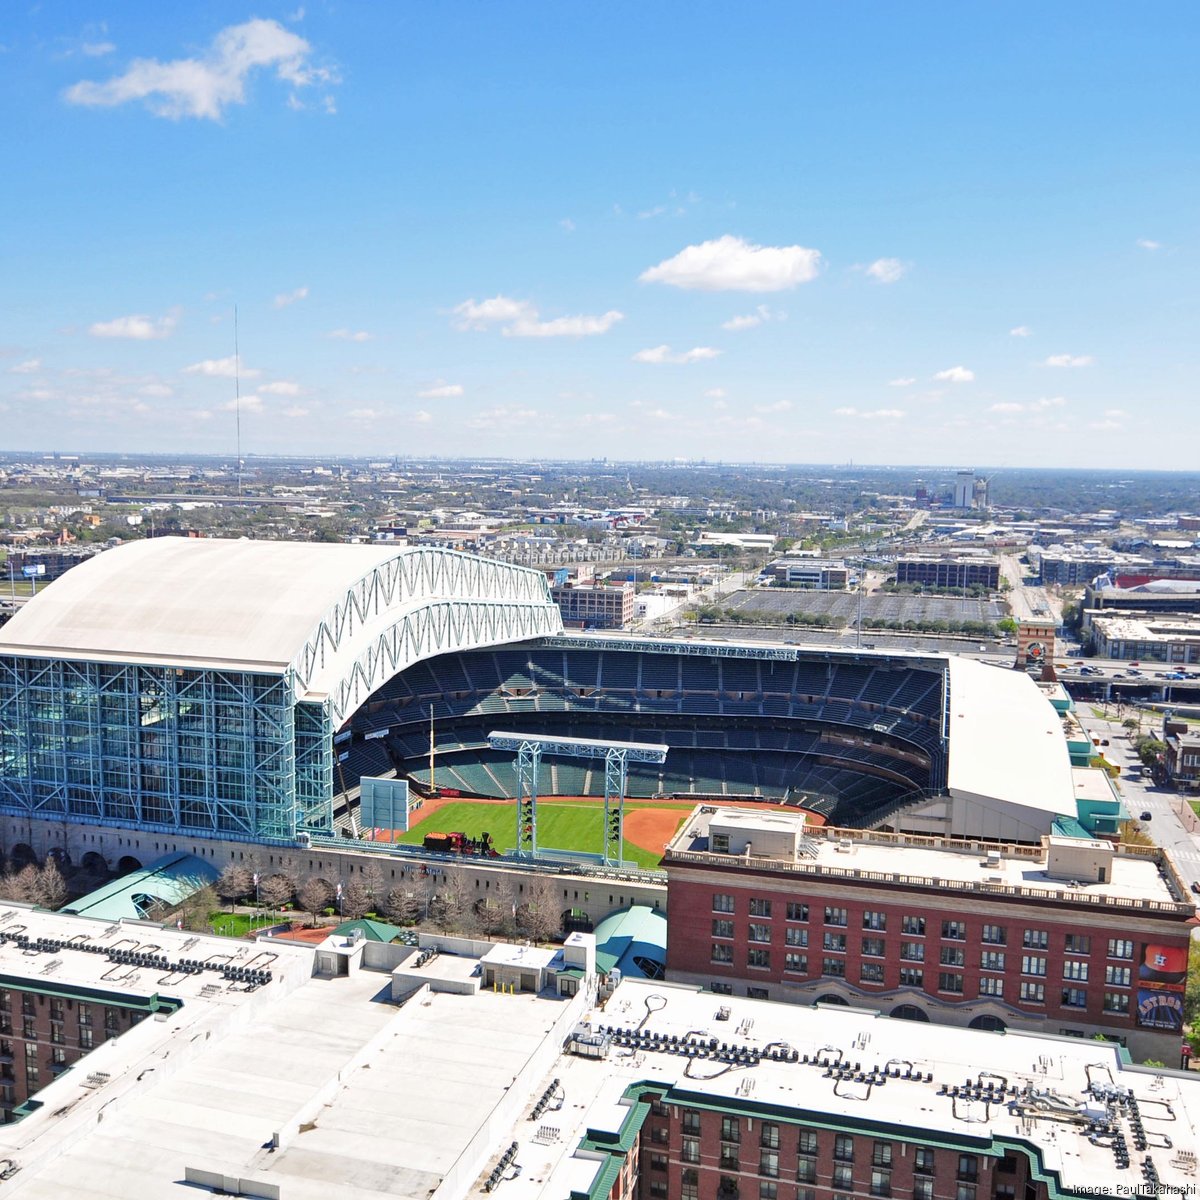 Aerial View of Minute Maid Park in Downtown Houston Texas